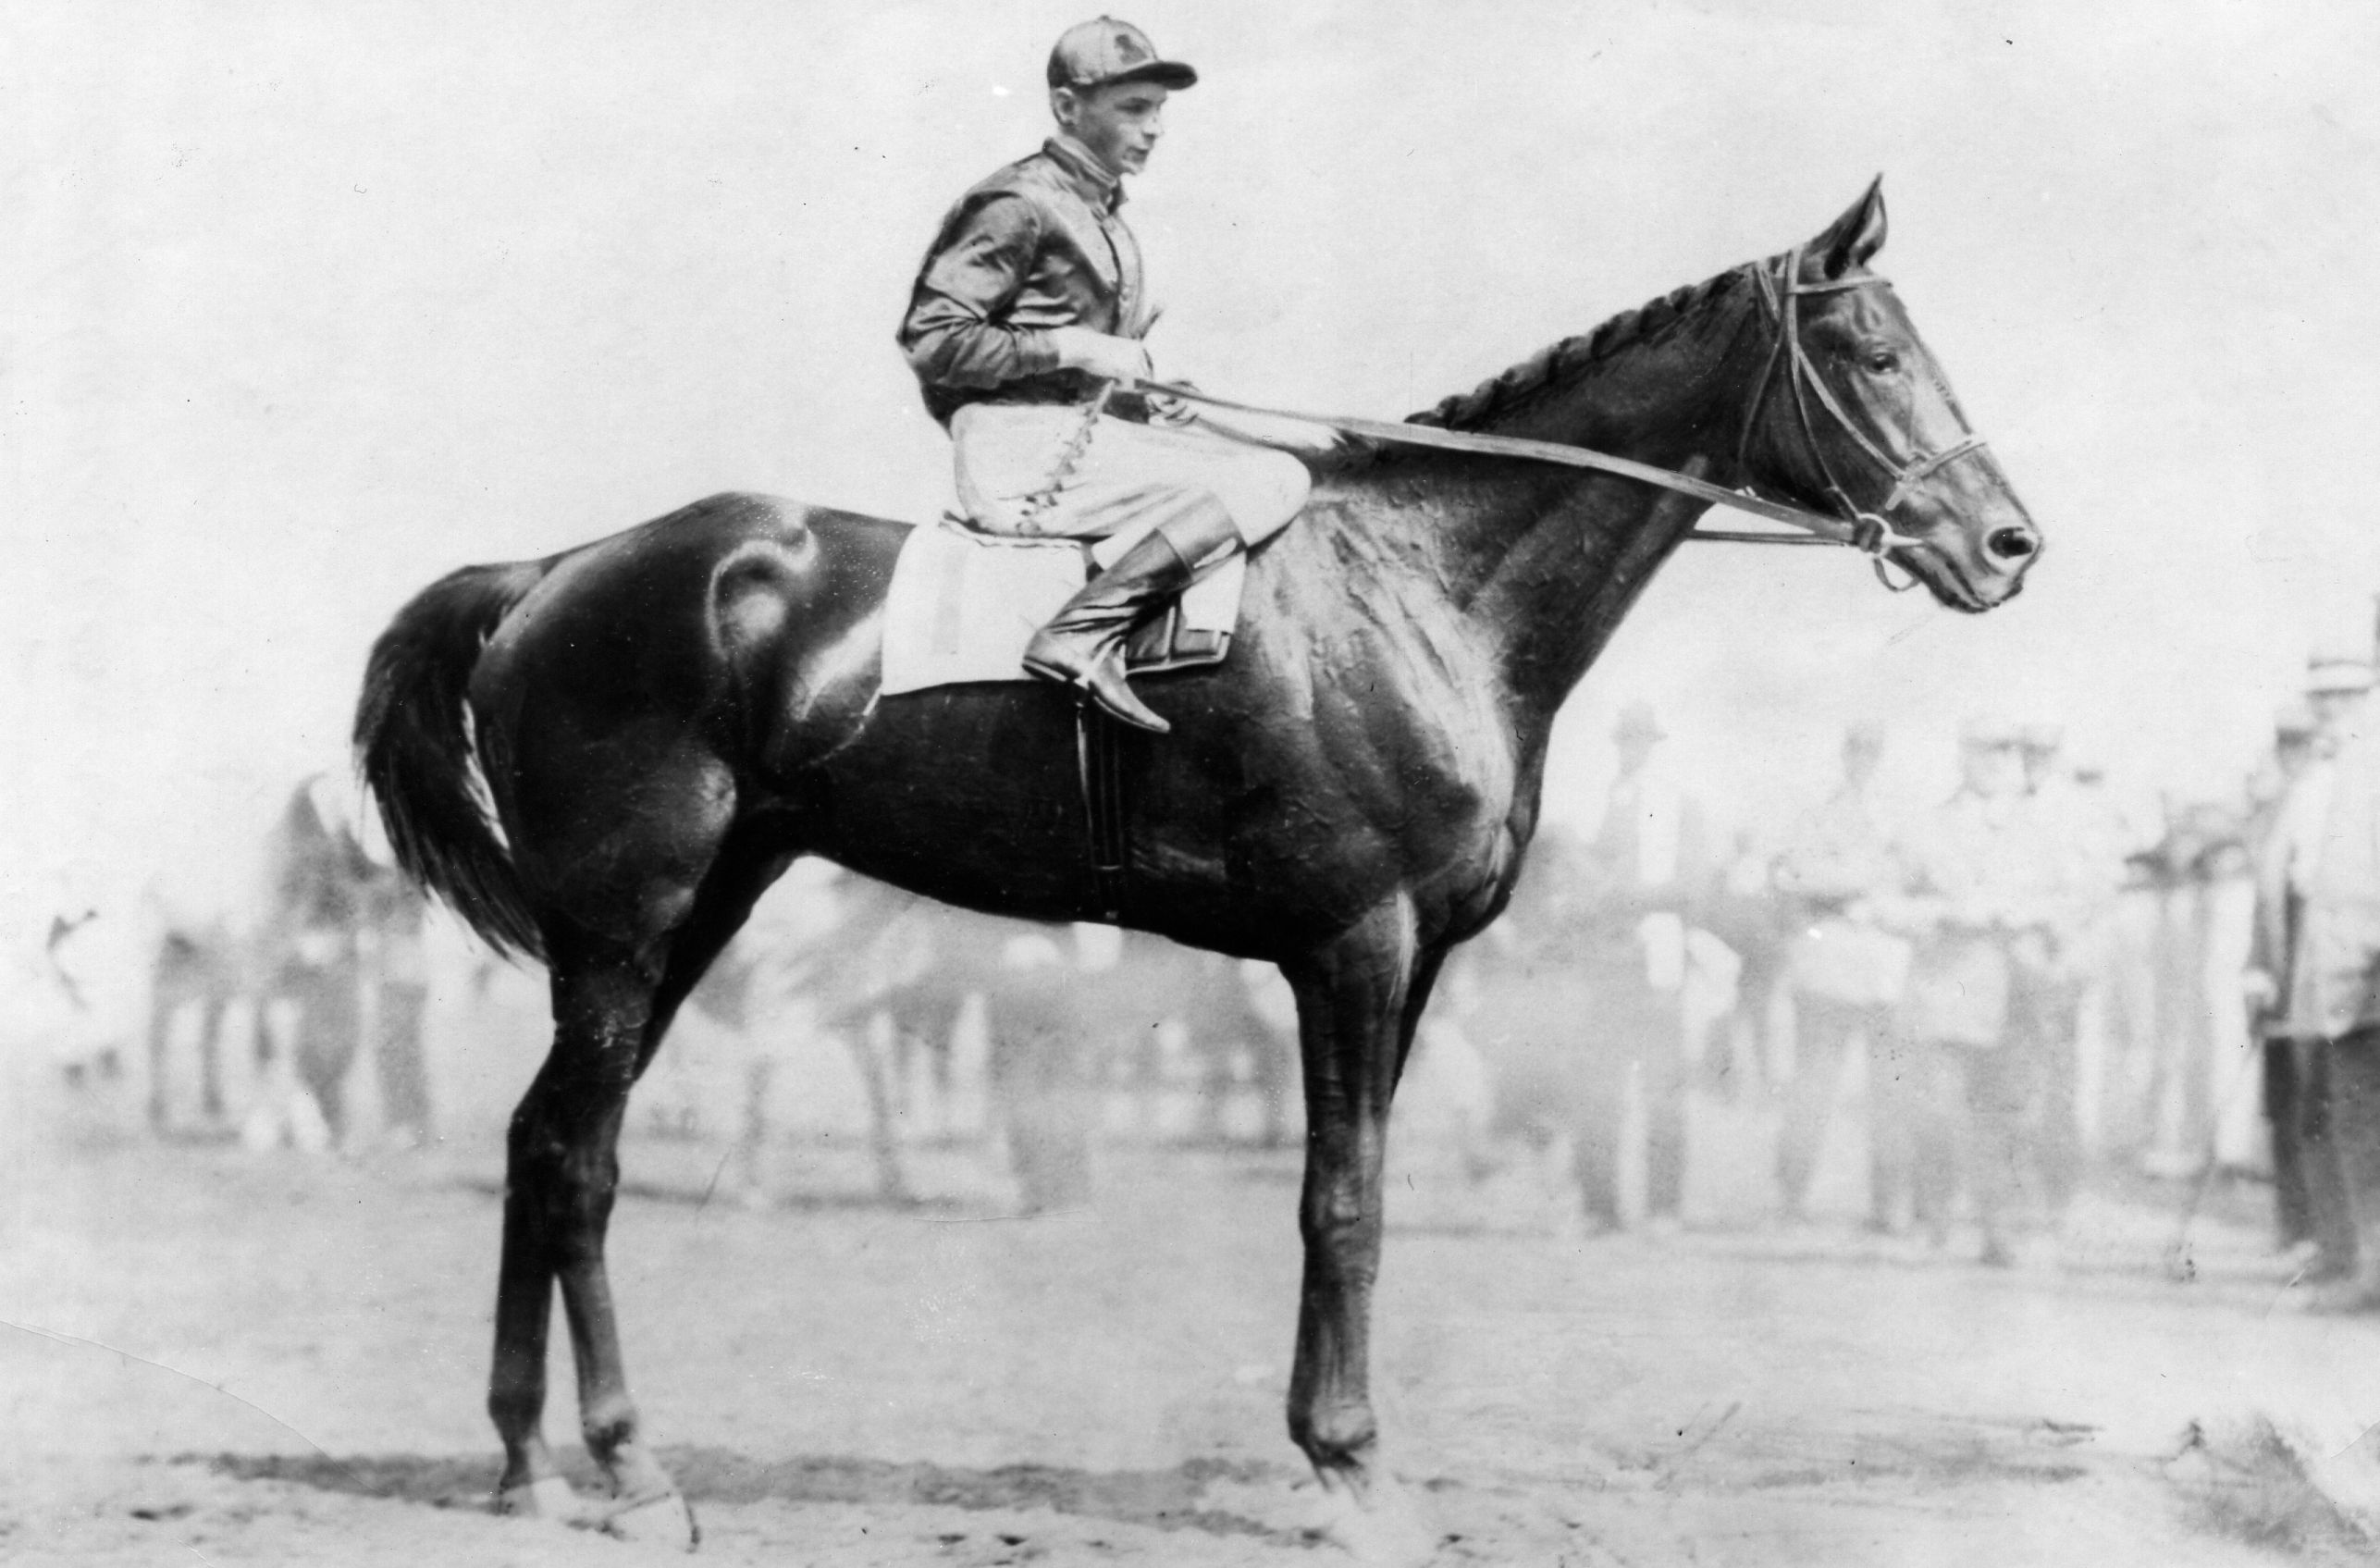 Exterminator (Albert Johnson up) at Saratoga in 1918 (Museum Collection)